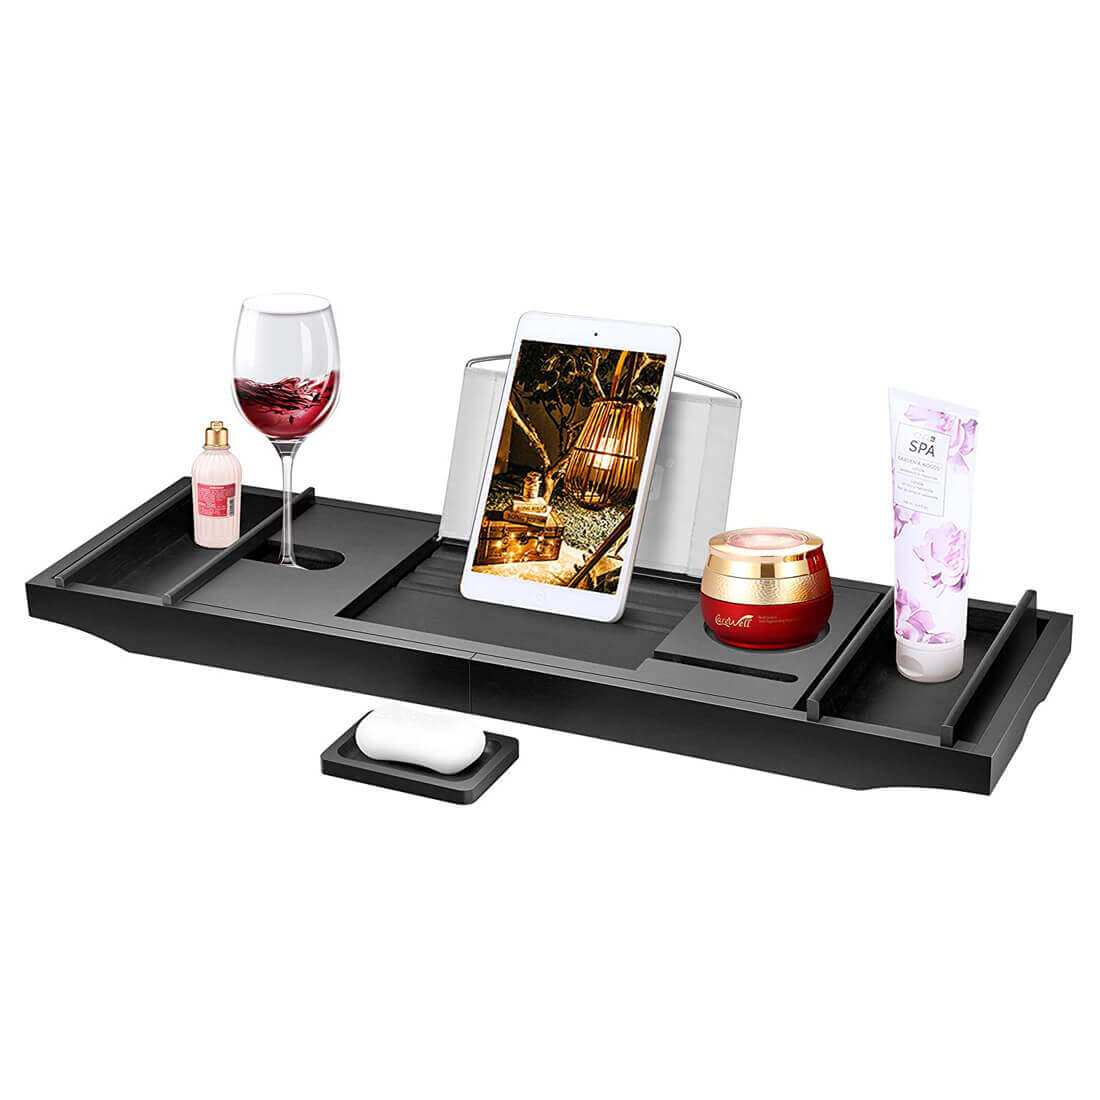 Bamboo Bathtub Tray Bath Tub Caddy with Expandable Handles Wine Glass Phone  Holder Book Stand for Bathroom White